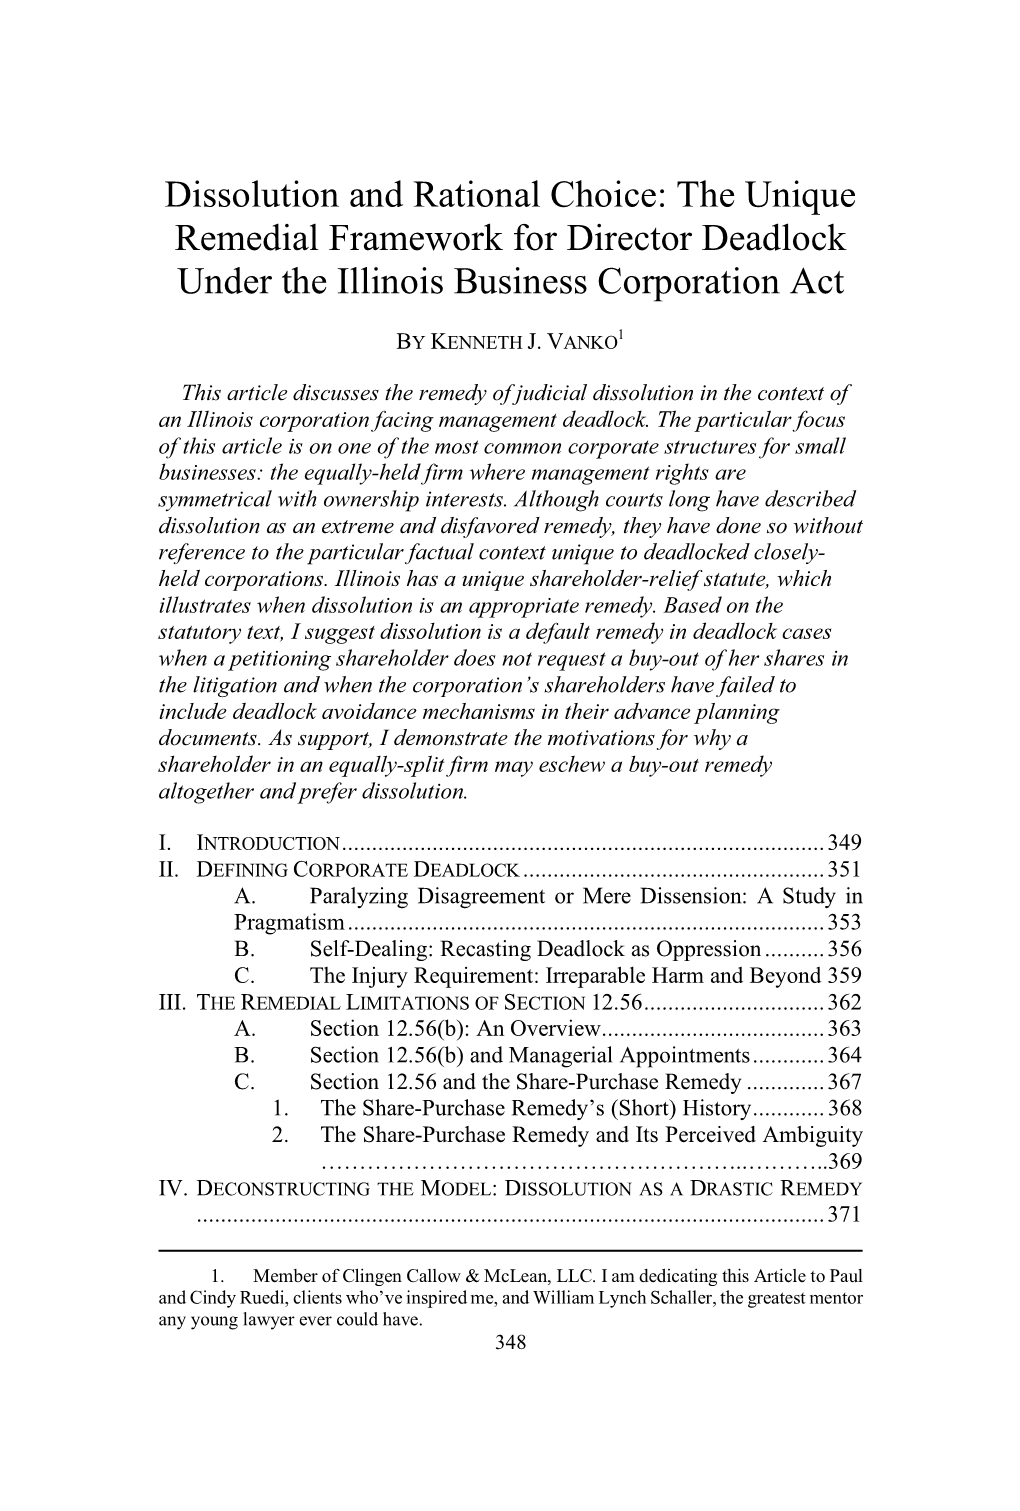 Dissolution and Rational Choice: the Unique Remedial Framework for Director Deadlock Under the Illinois Business Corporation Act